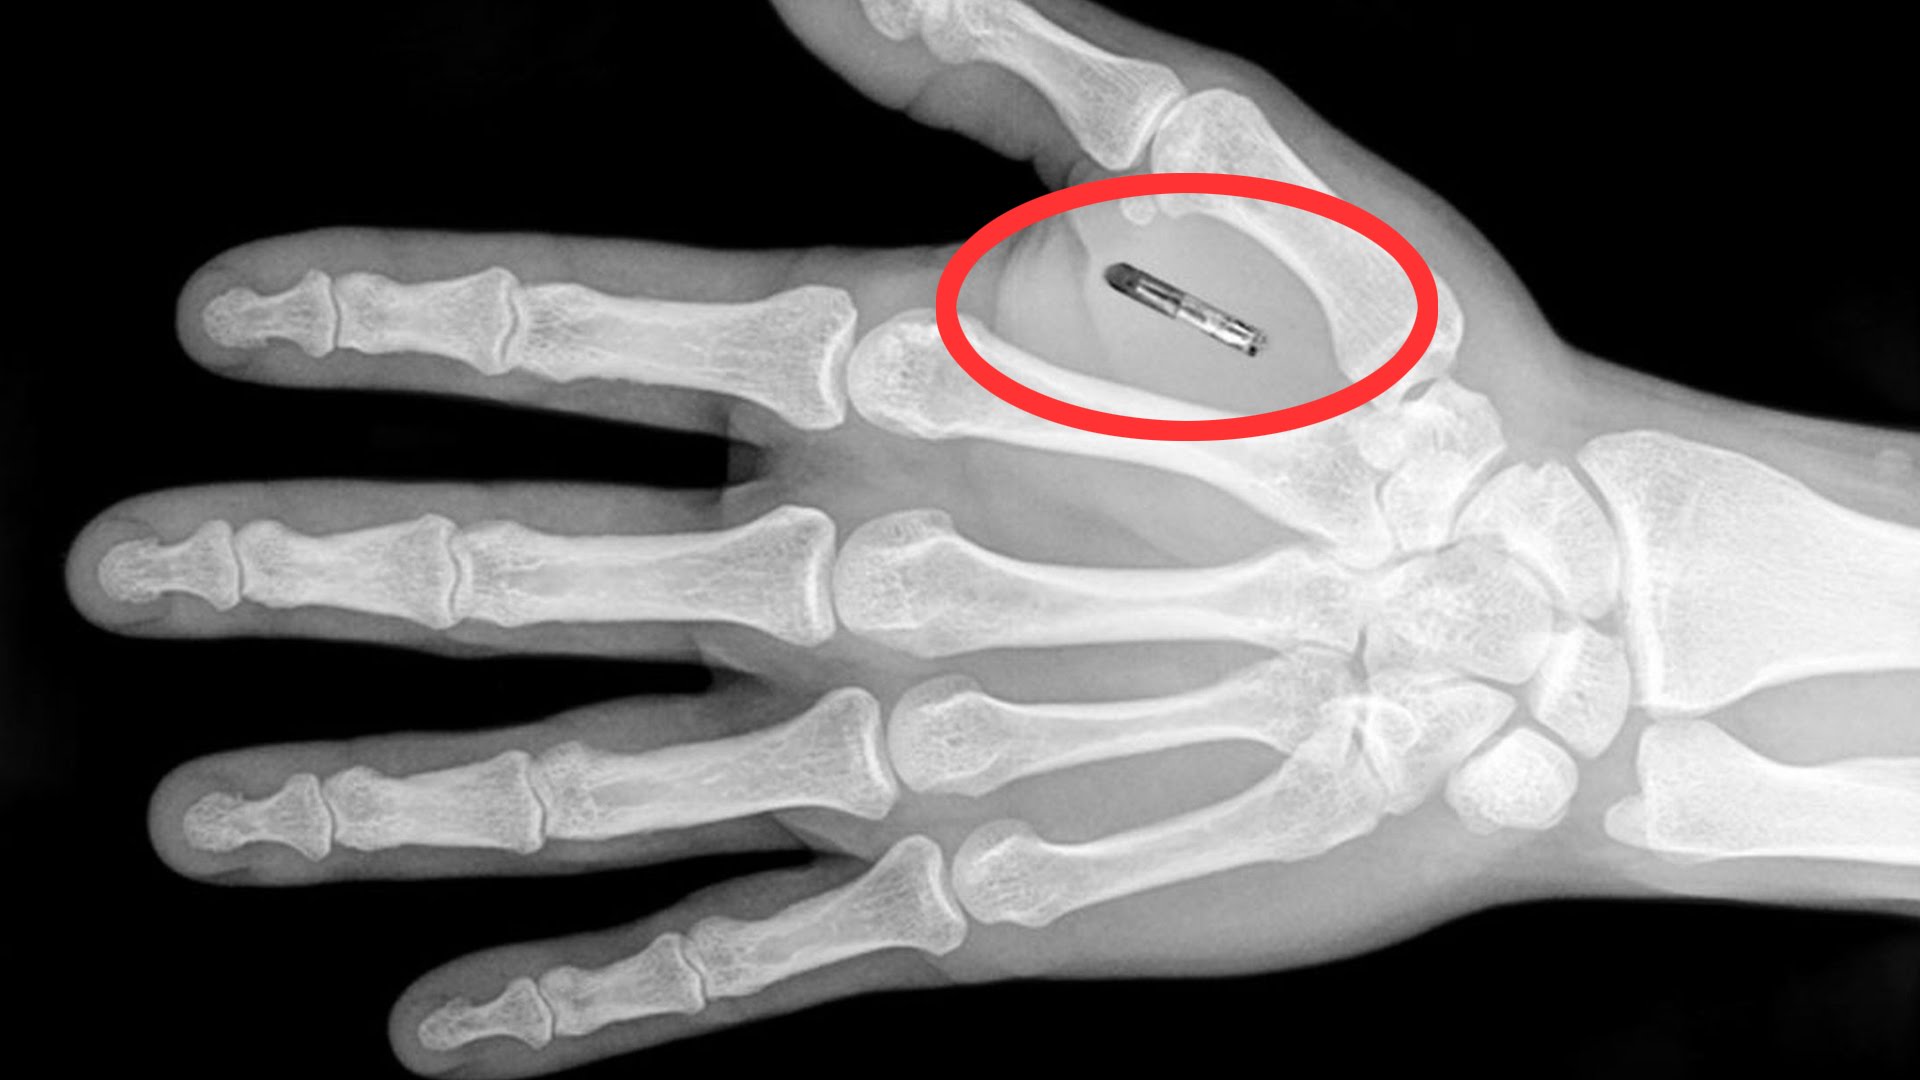 Australian, Swedish & U.S. companies are microchipping their employees at alarming rates!